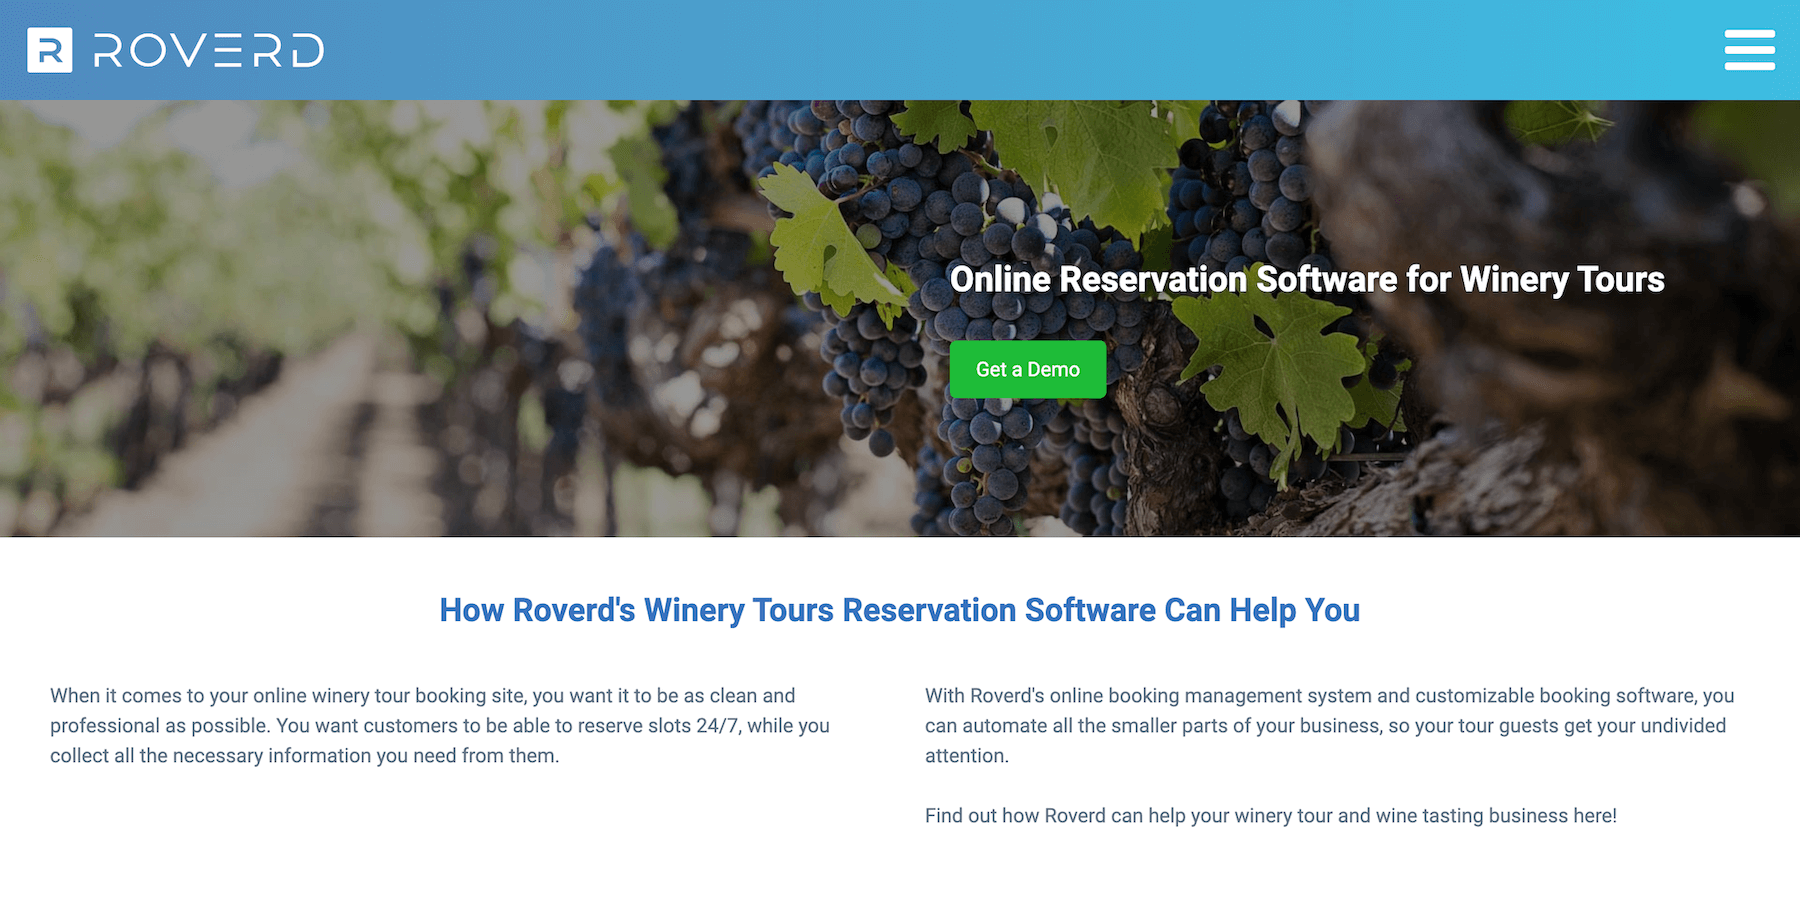 Roverd homepage: Online Reservation Software for Winery Tours